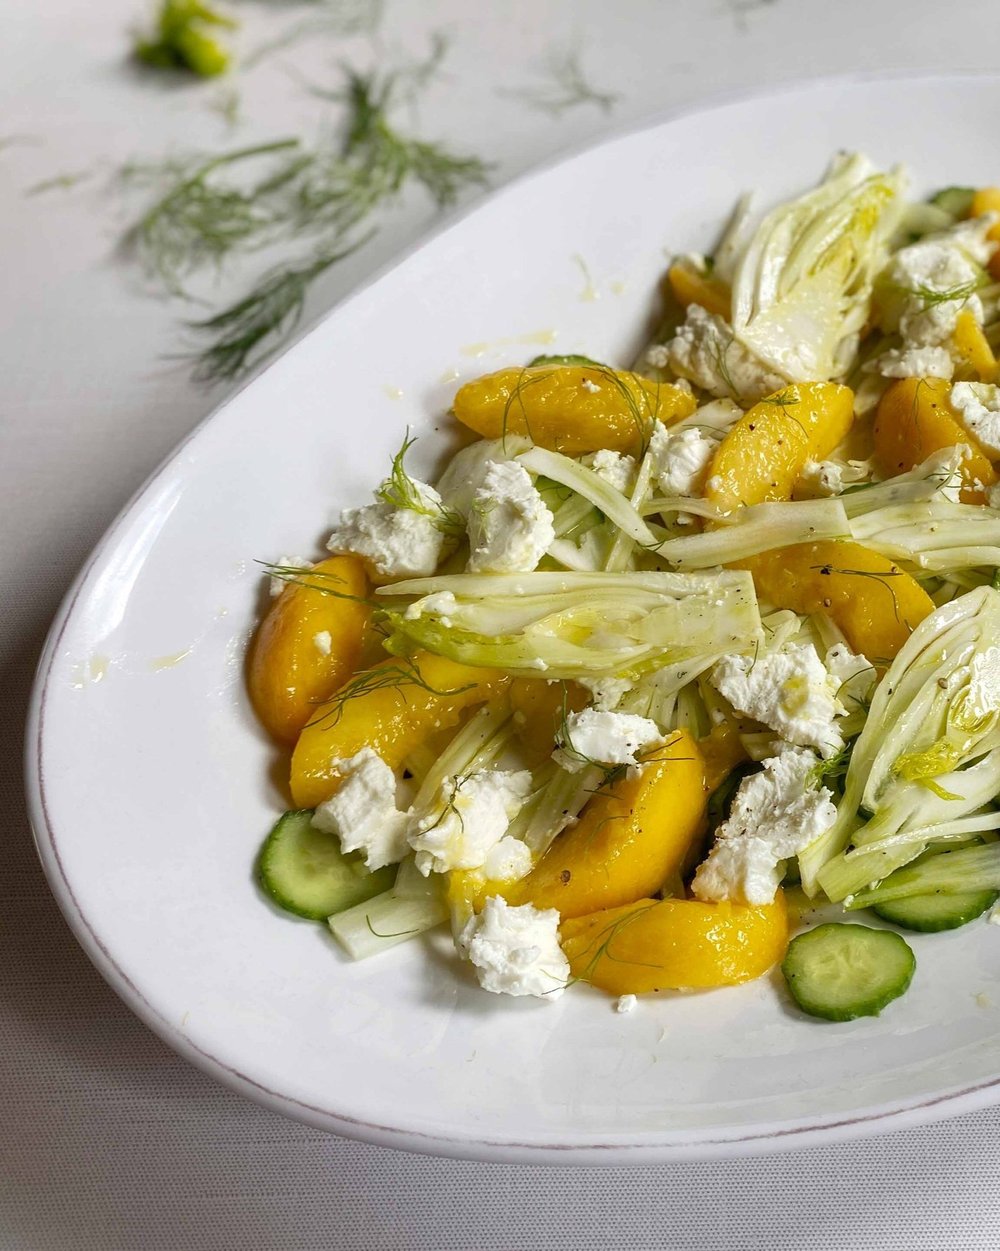 Claudia Roden's Fennel, Peach and Goat Cheese Salad